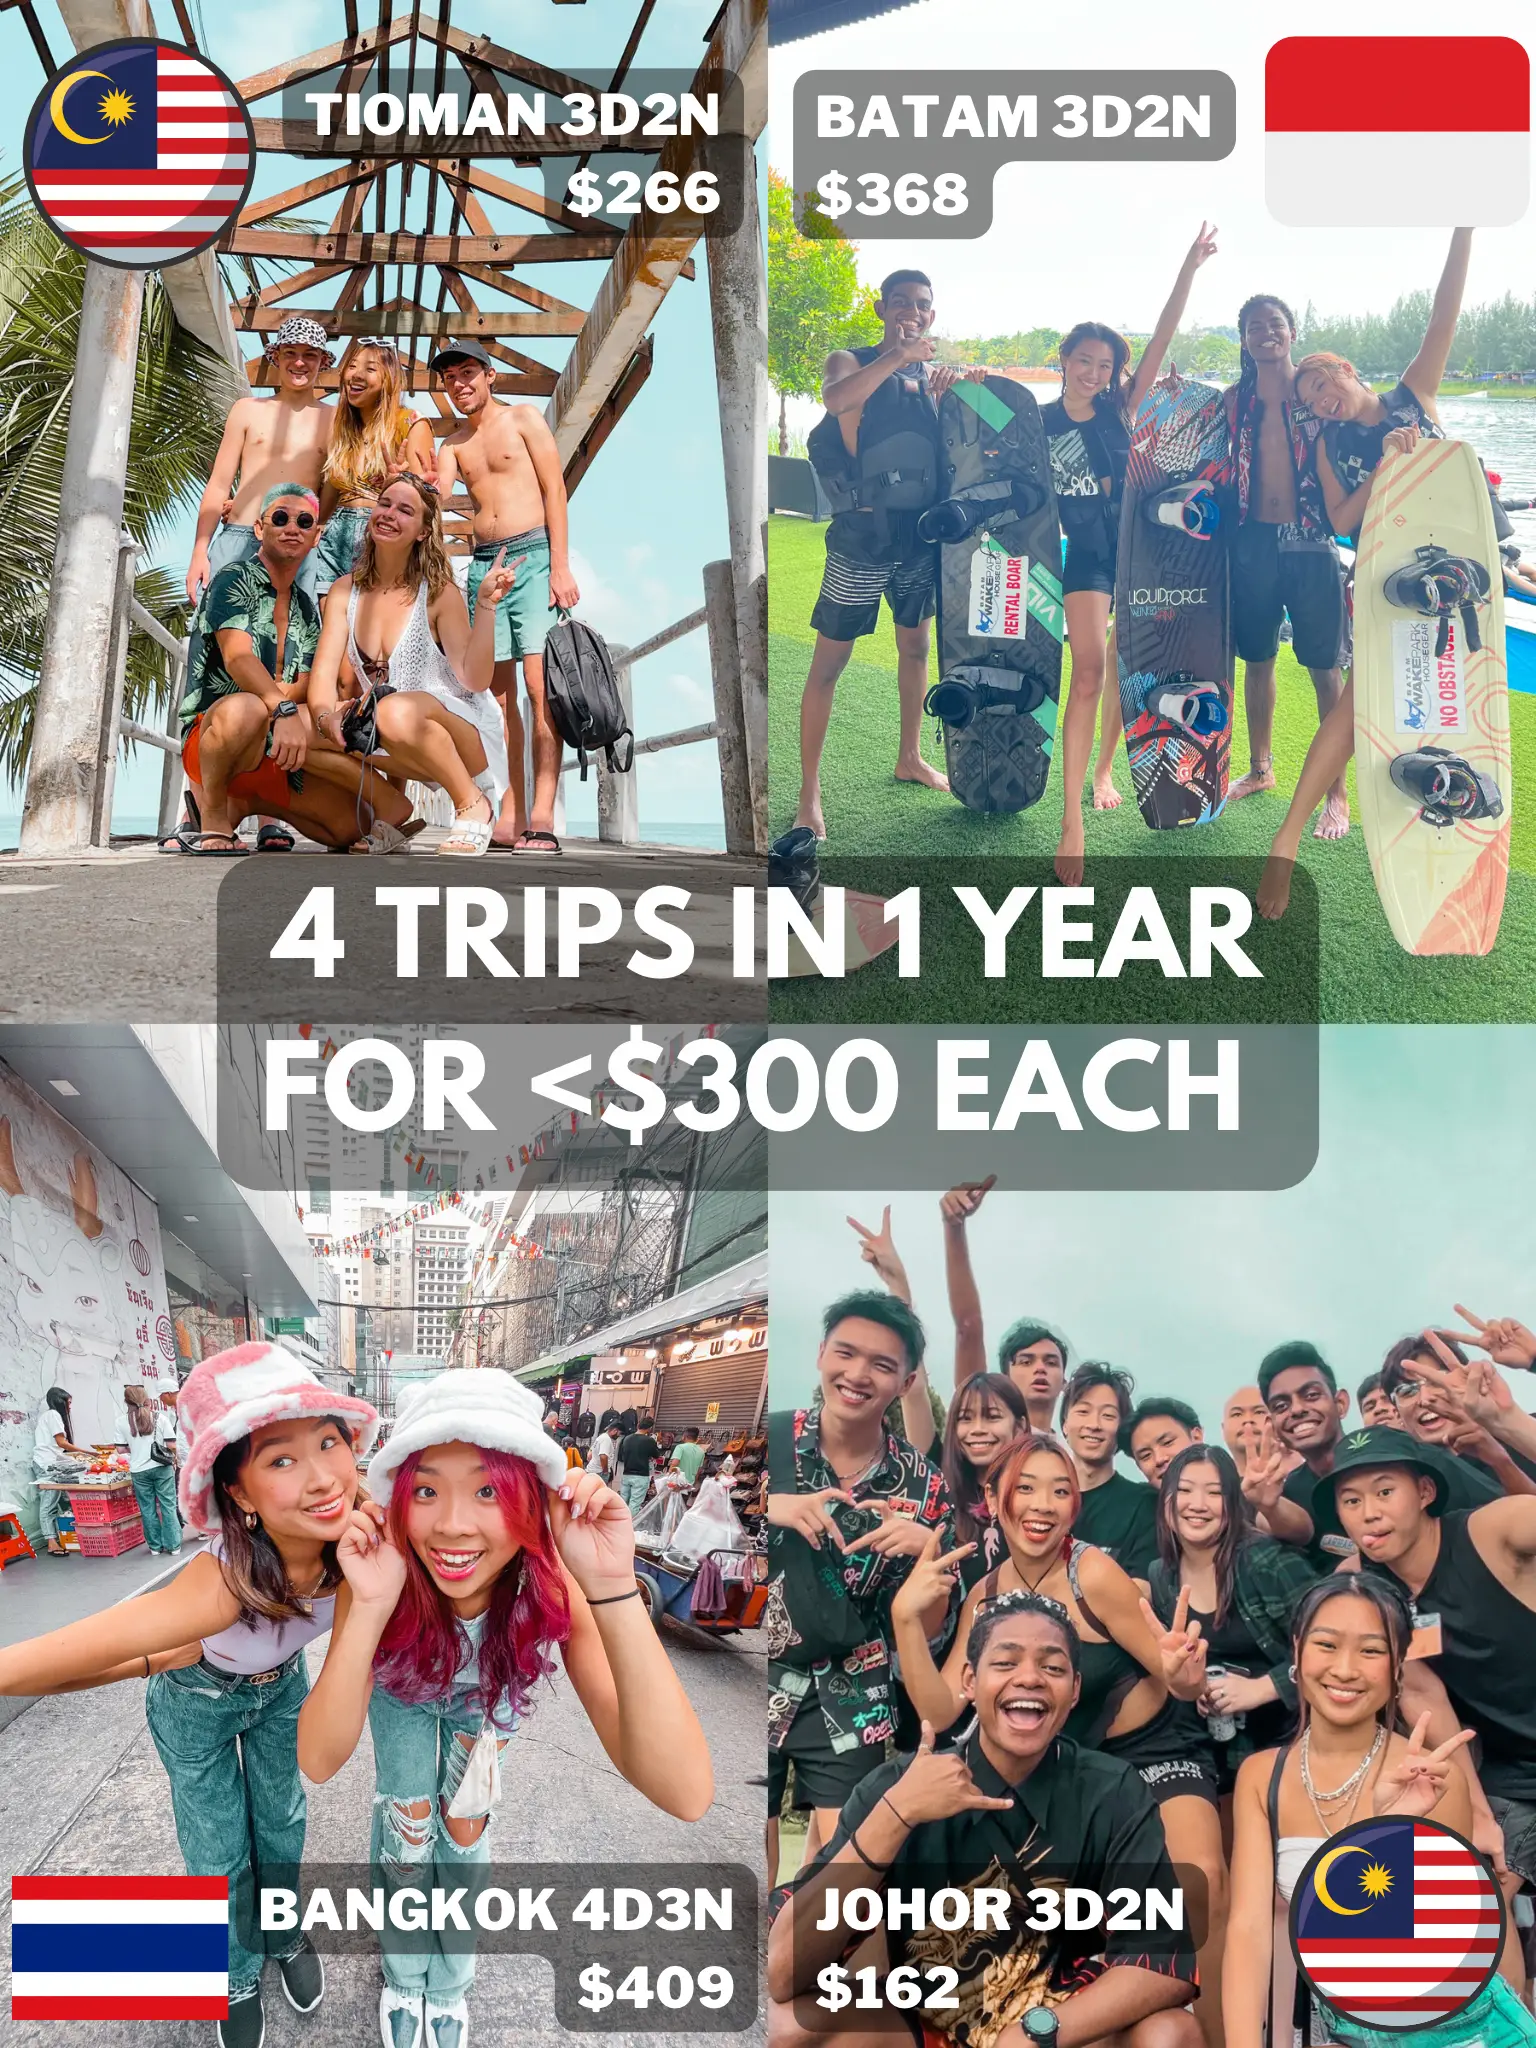 4 TRIPS IN 1 YEAR FOR <$300 EACH ✈️'s images(0)